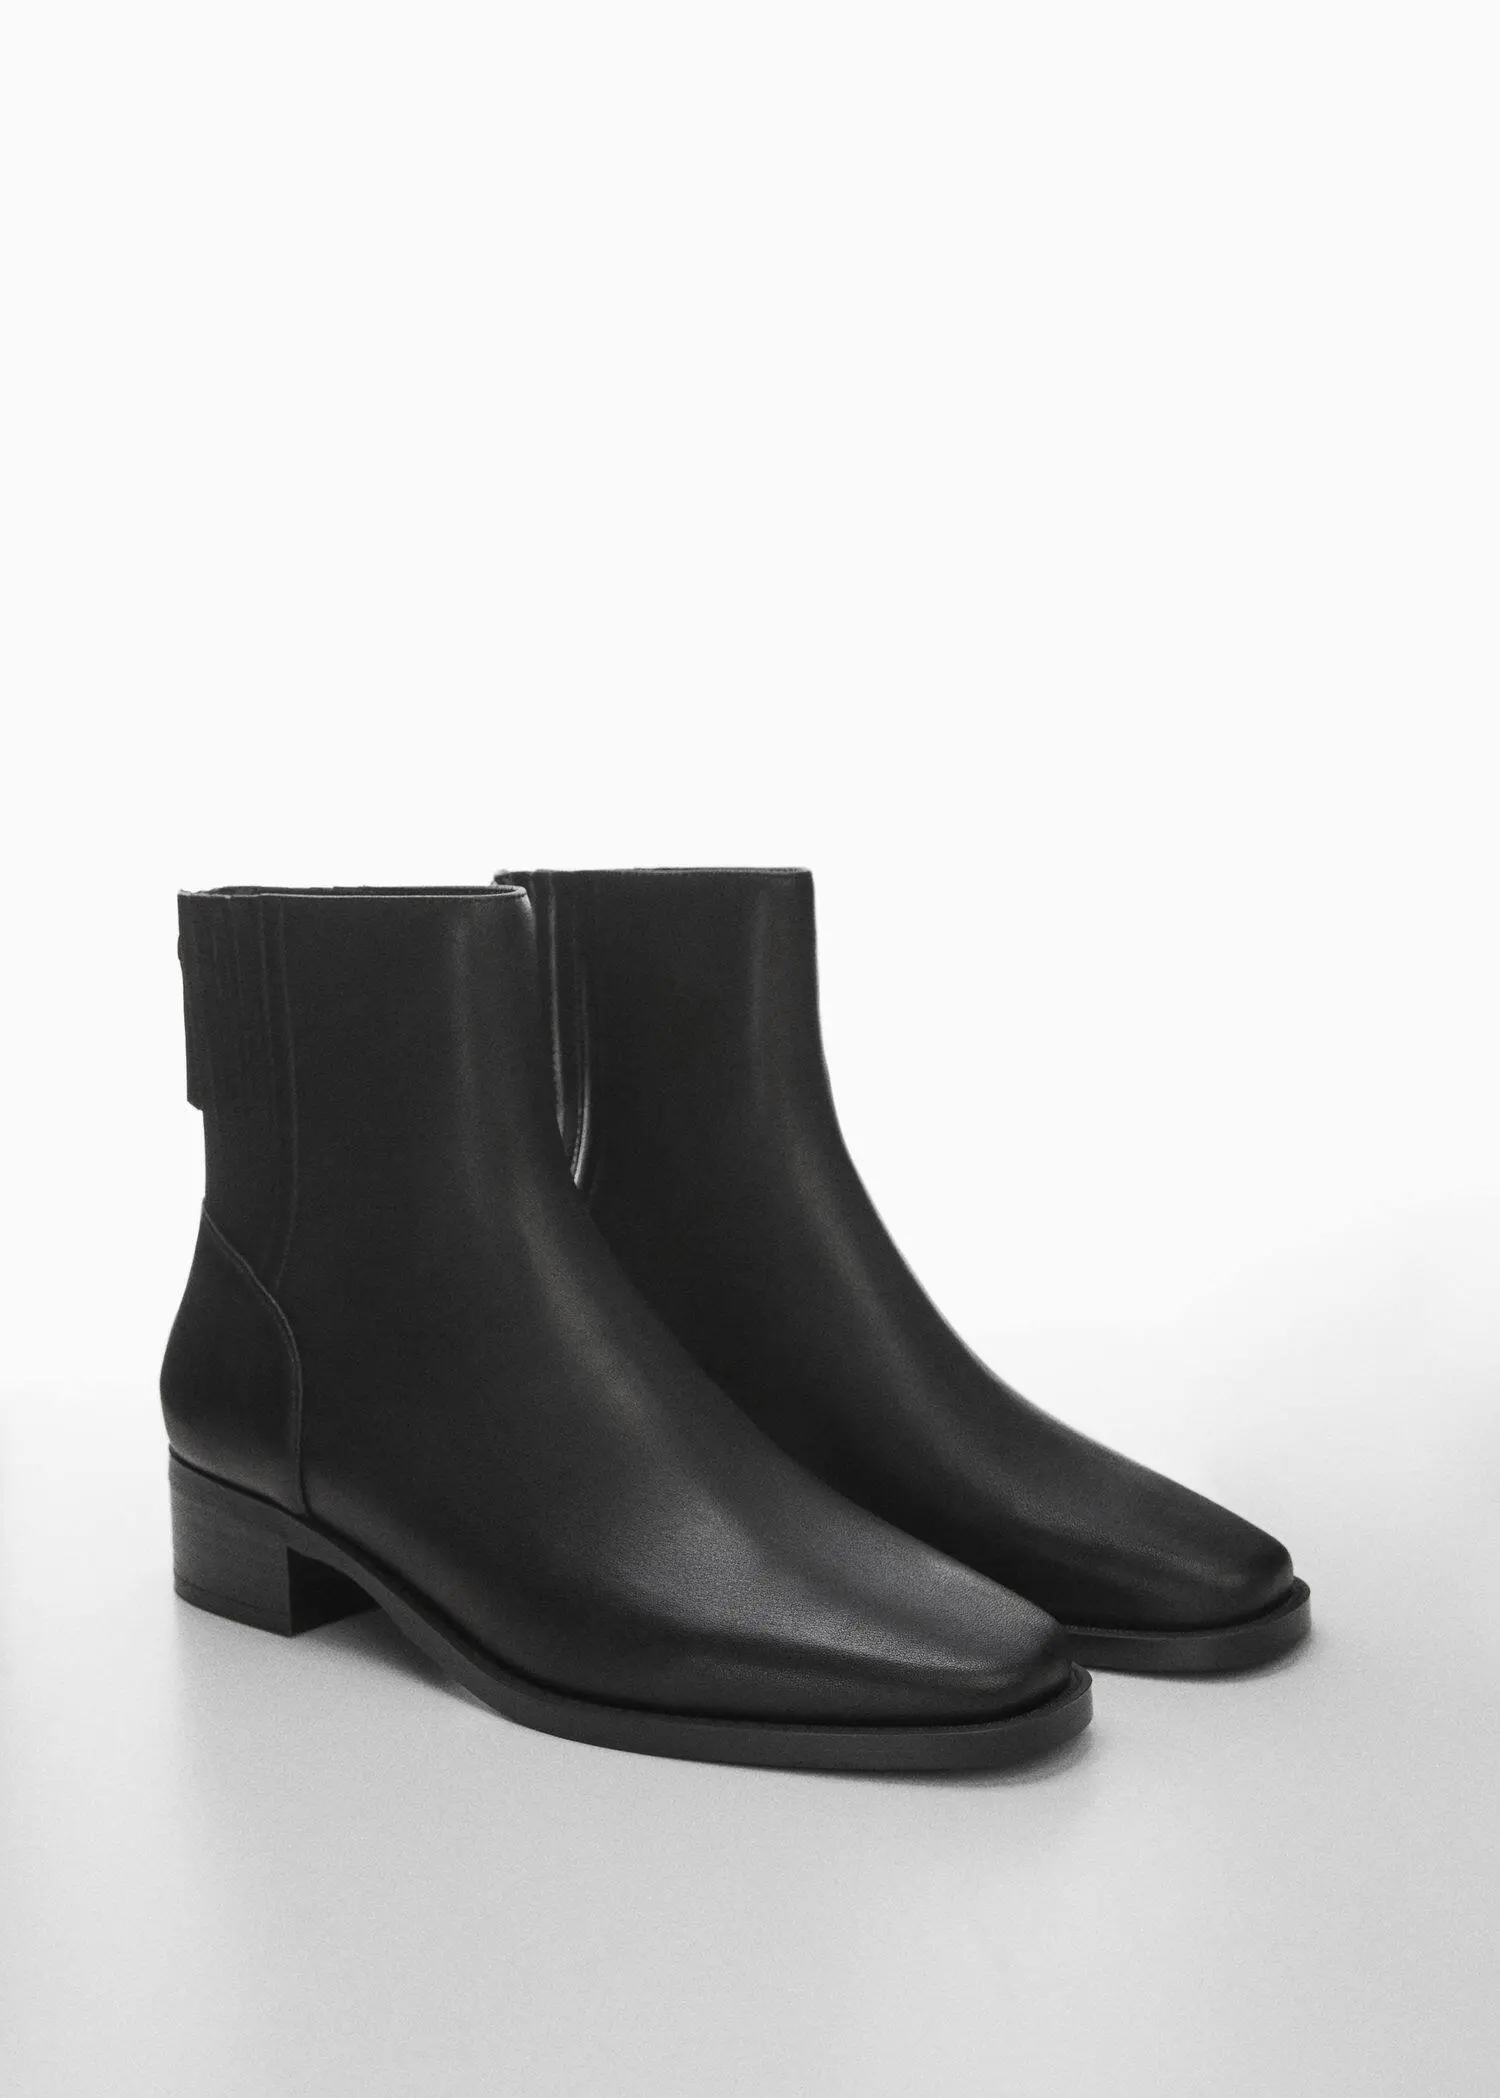 Mango Leather ankle boots with ankle zip closure. 2